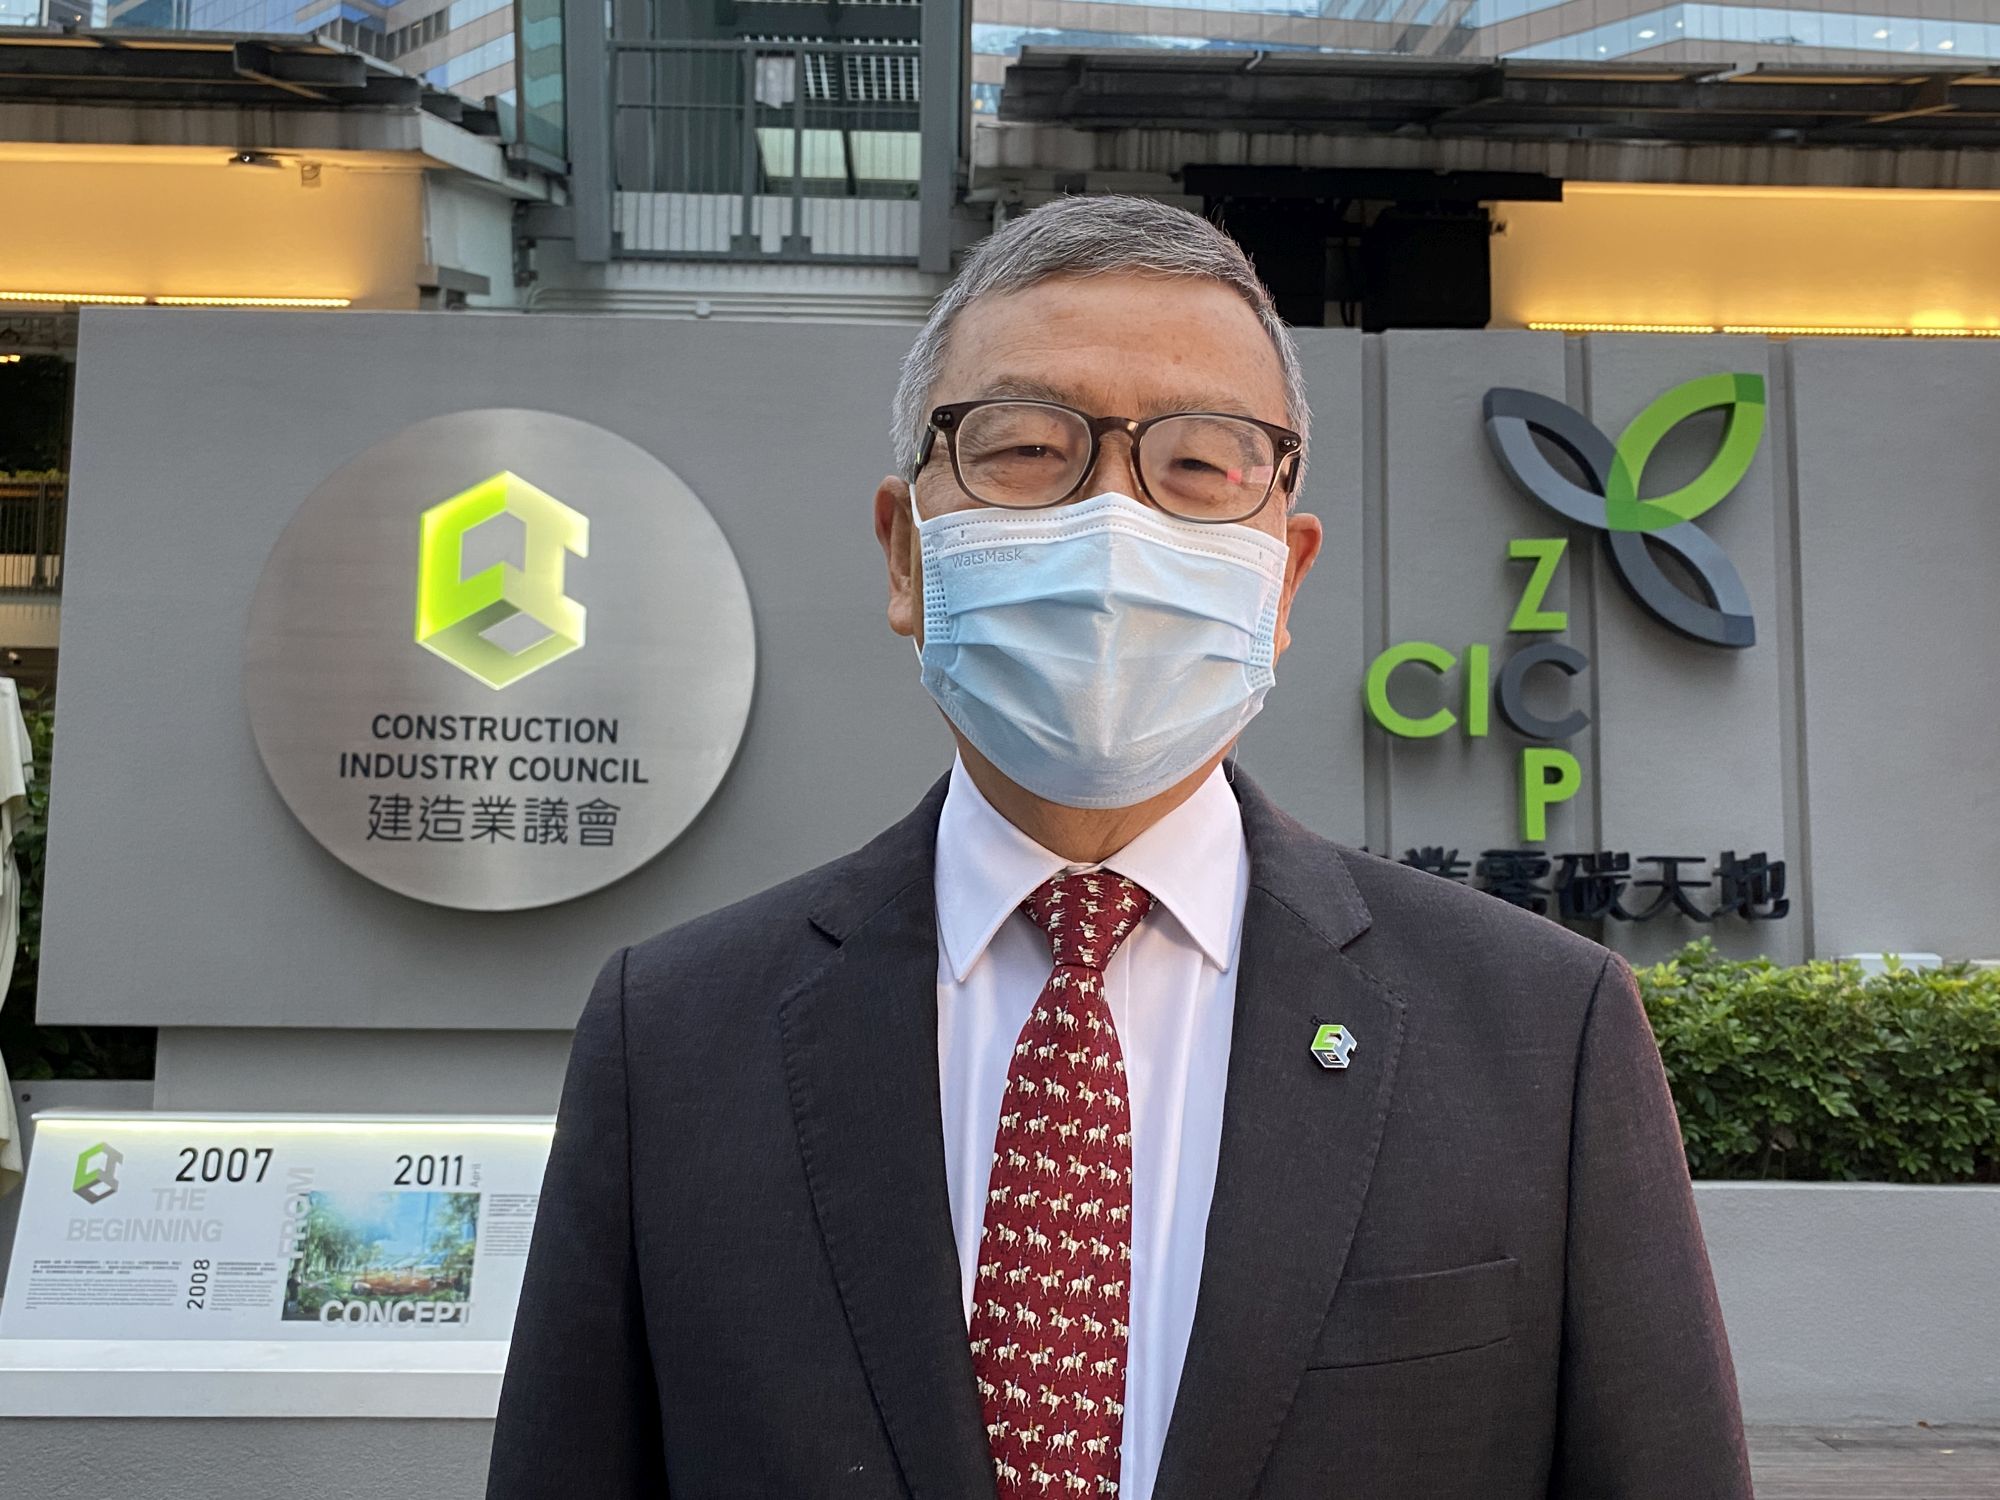 In his six years as Chairperson of the CIC, KK feels most strongly about his work with the Development Bureau to promote the adoption of Modular Integrated Construction (MiC) in Hong Kong, and the Construction Industry Caring Campaign, a fund-raising campaign launched by the CIC for frontline workers during the epidemic in 2020. 